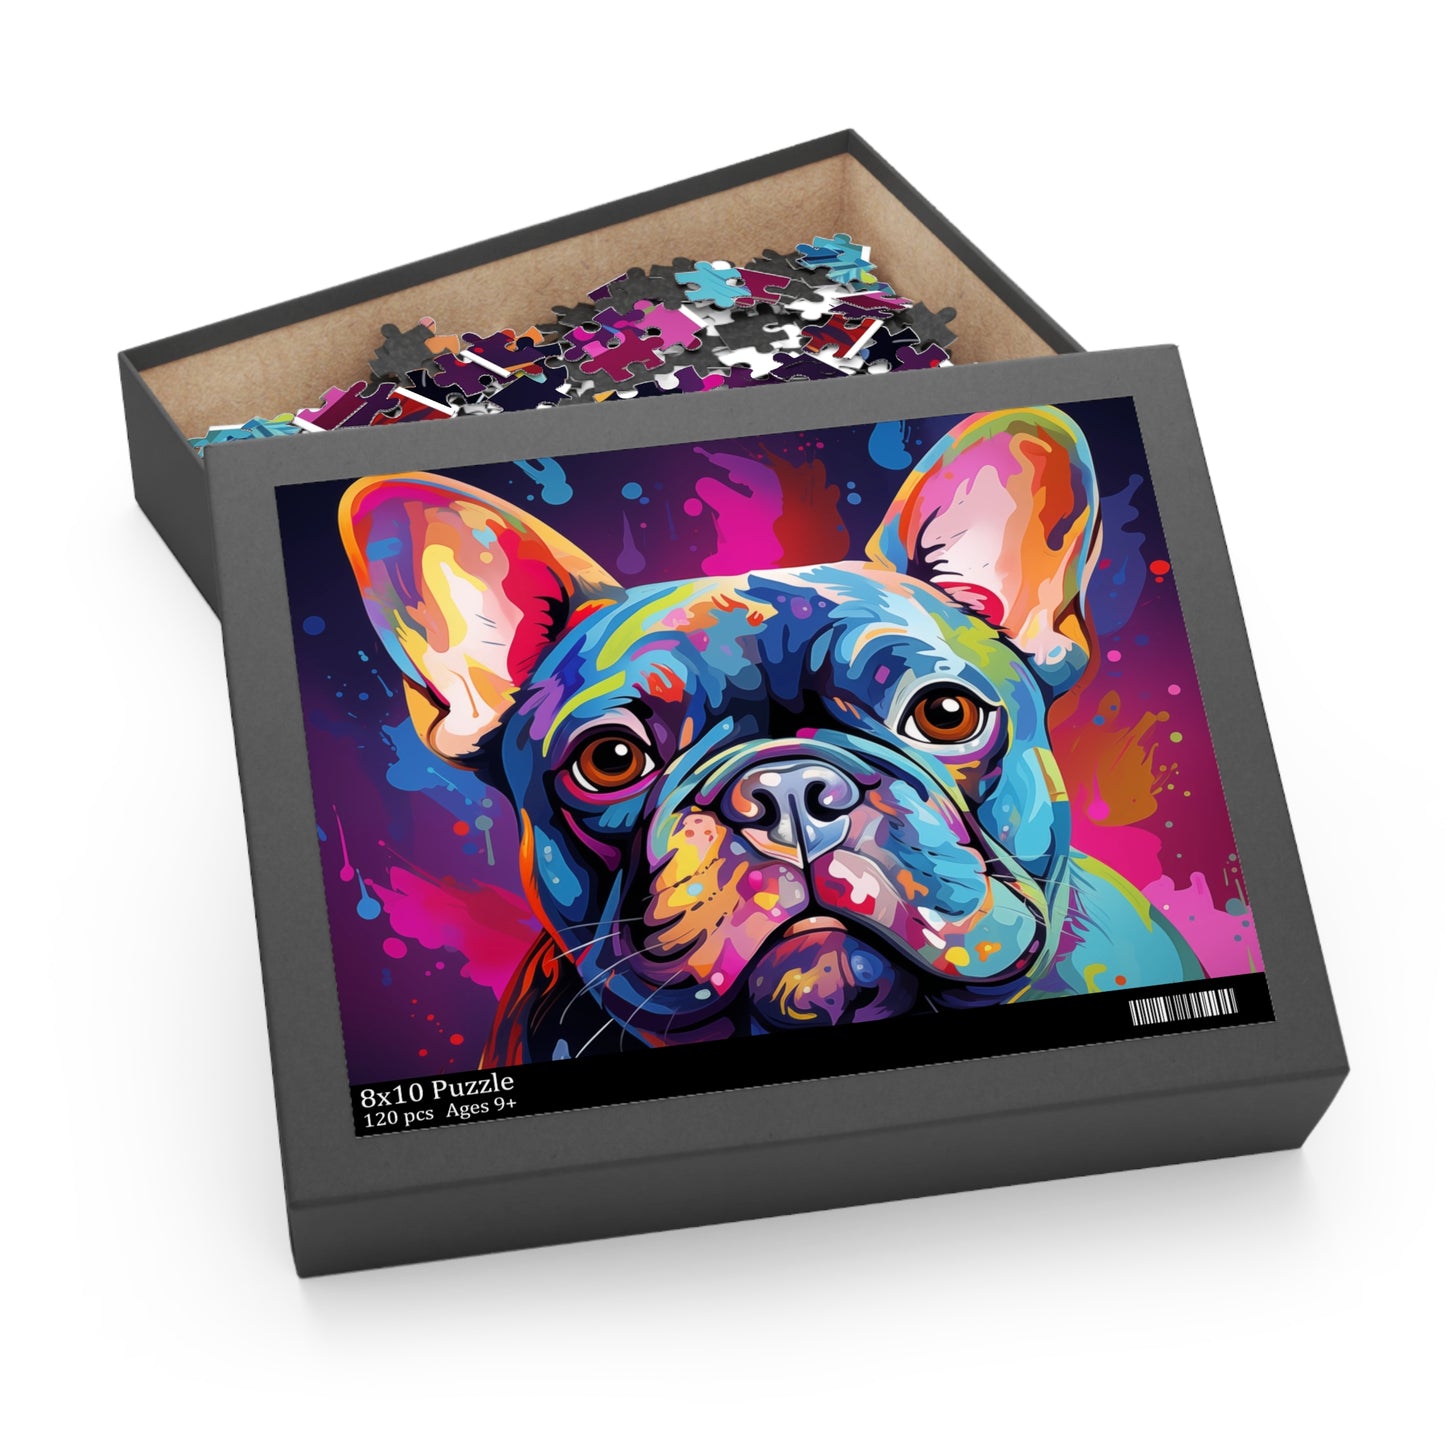 Oil Paint Watercolor Abstract Frenchie Dog Jigsaw Puzzle Adult Birthday Business Jigsaw Puzzle Gift for Him Funny Humorous Indoor Outdoor Game Gift For Her Online-6